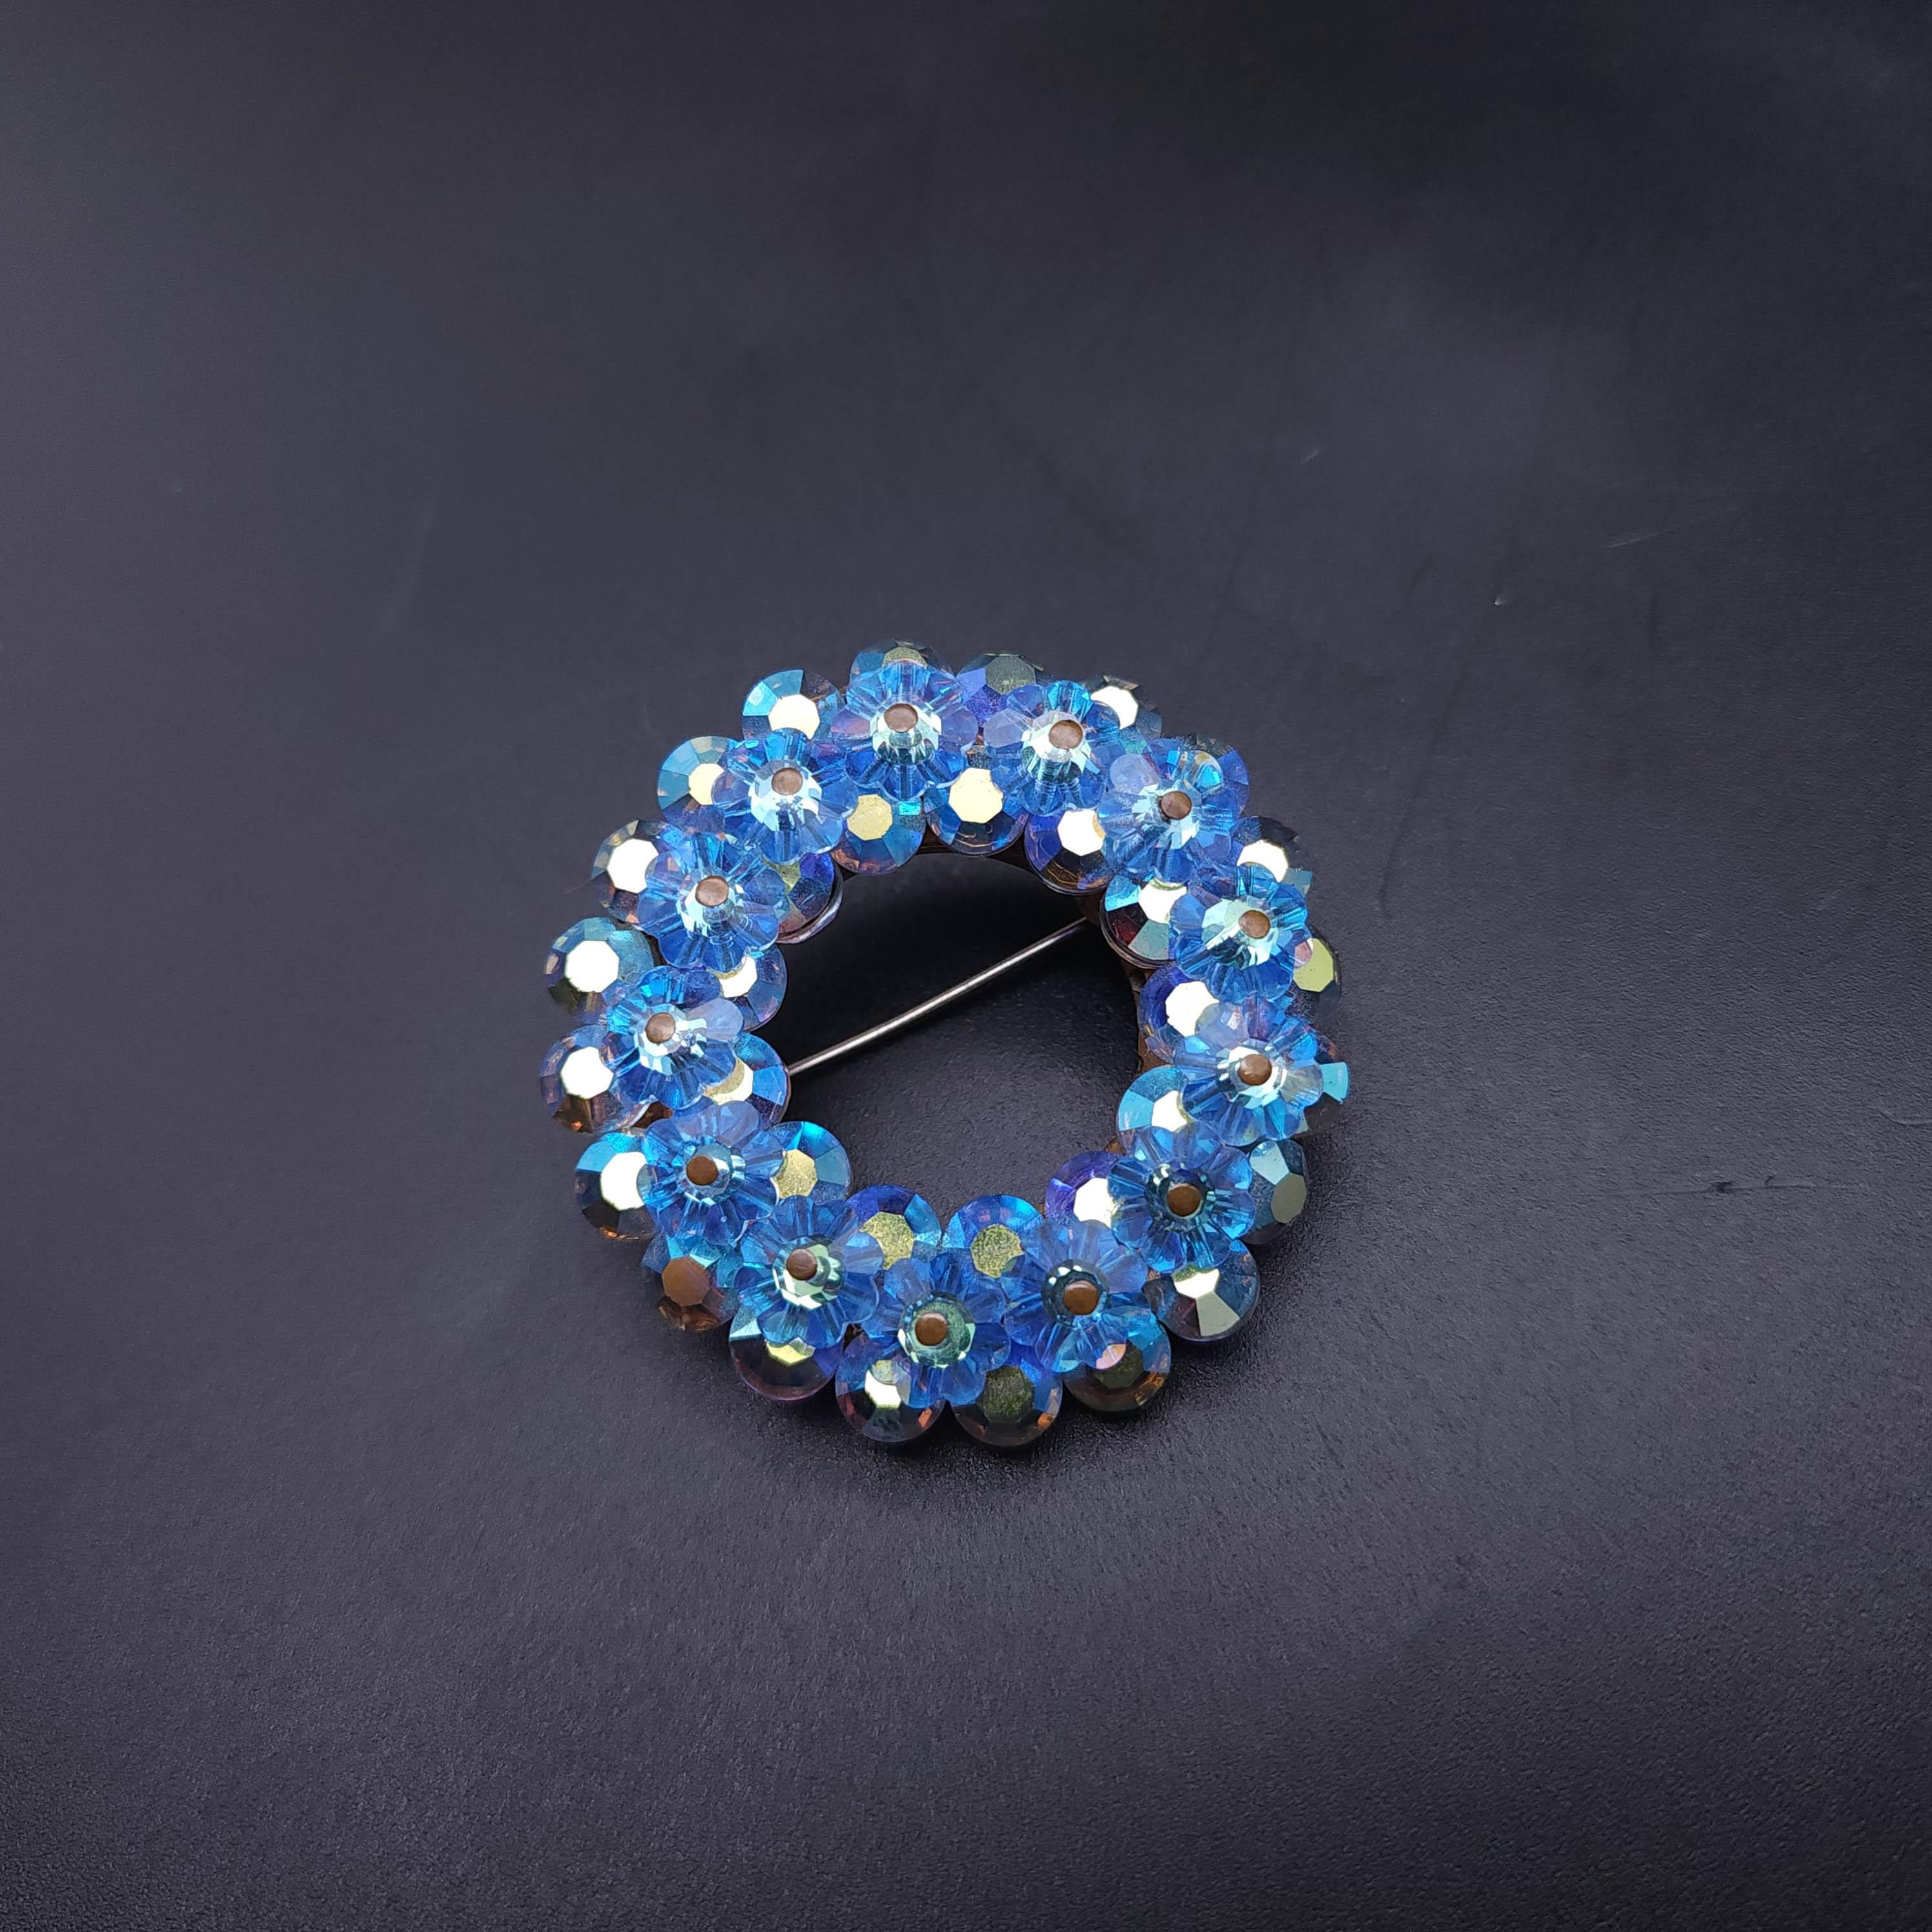 Brooch size: 1.75 inches
Earring size: 0.75 inches each

Indulge in the timeless elegance of our vintage blue crystal demi parure, featuring a mesmerizing brooch and matching clip-on earrings. Each piece is meticulously crafted with a radiant light